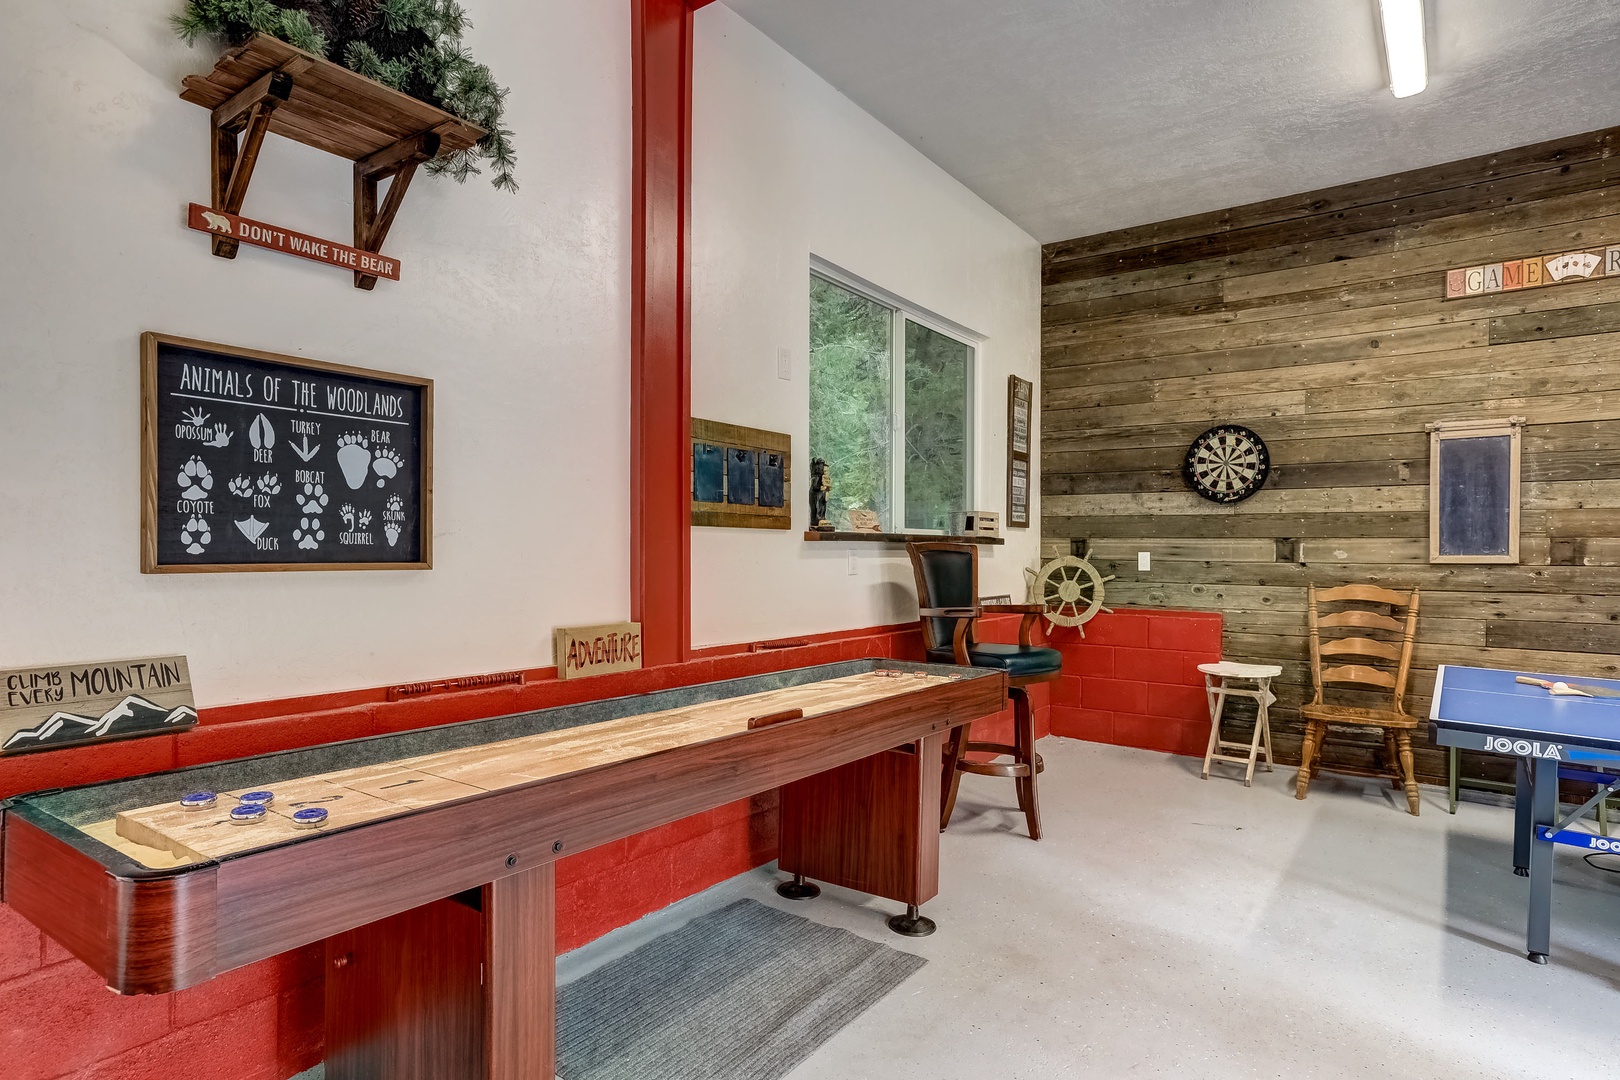 Game room with ping pong table, shuffleboard table, and darts